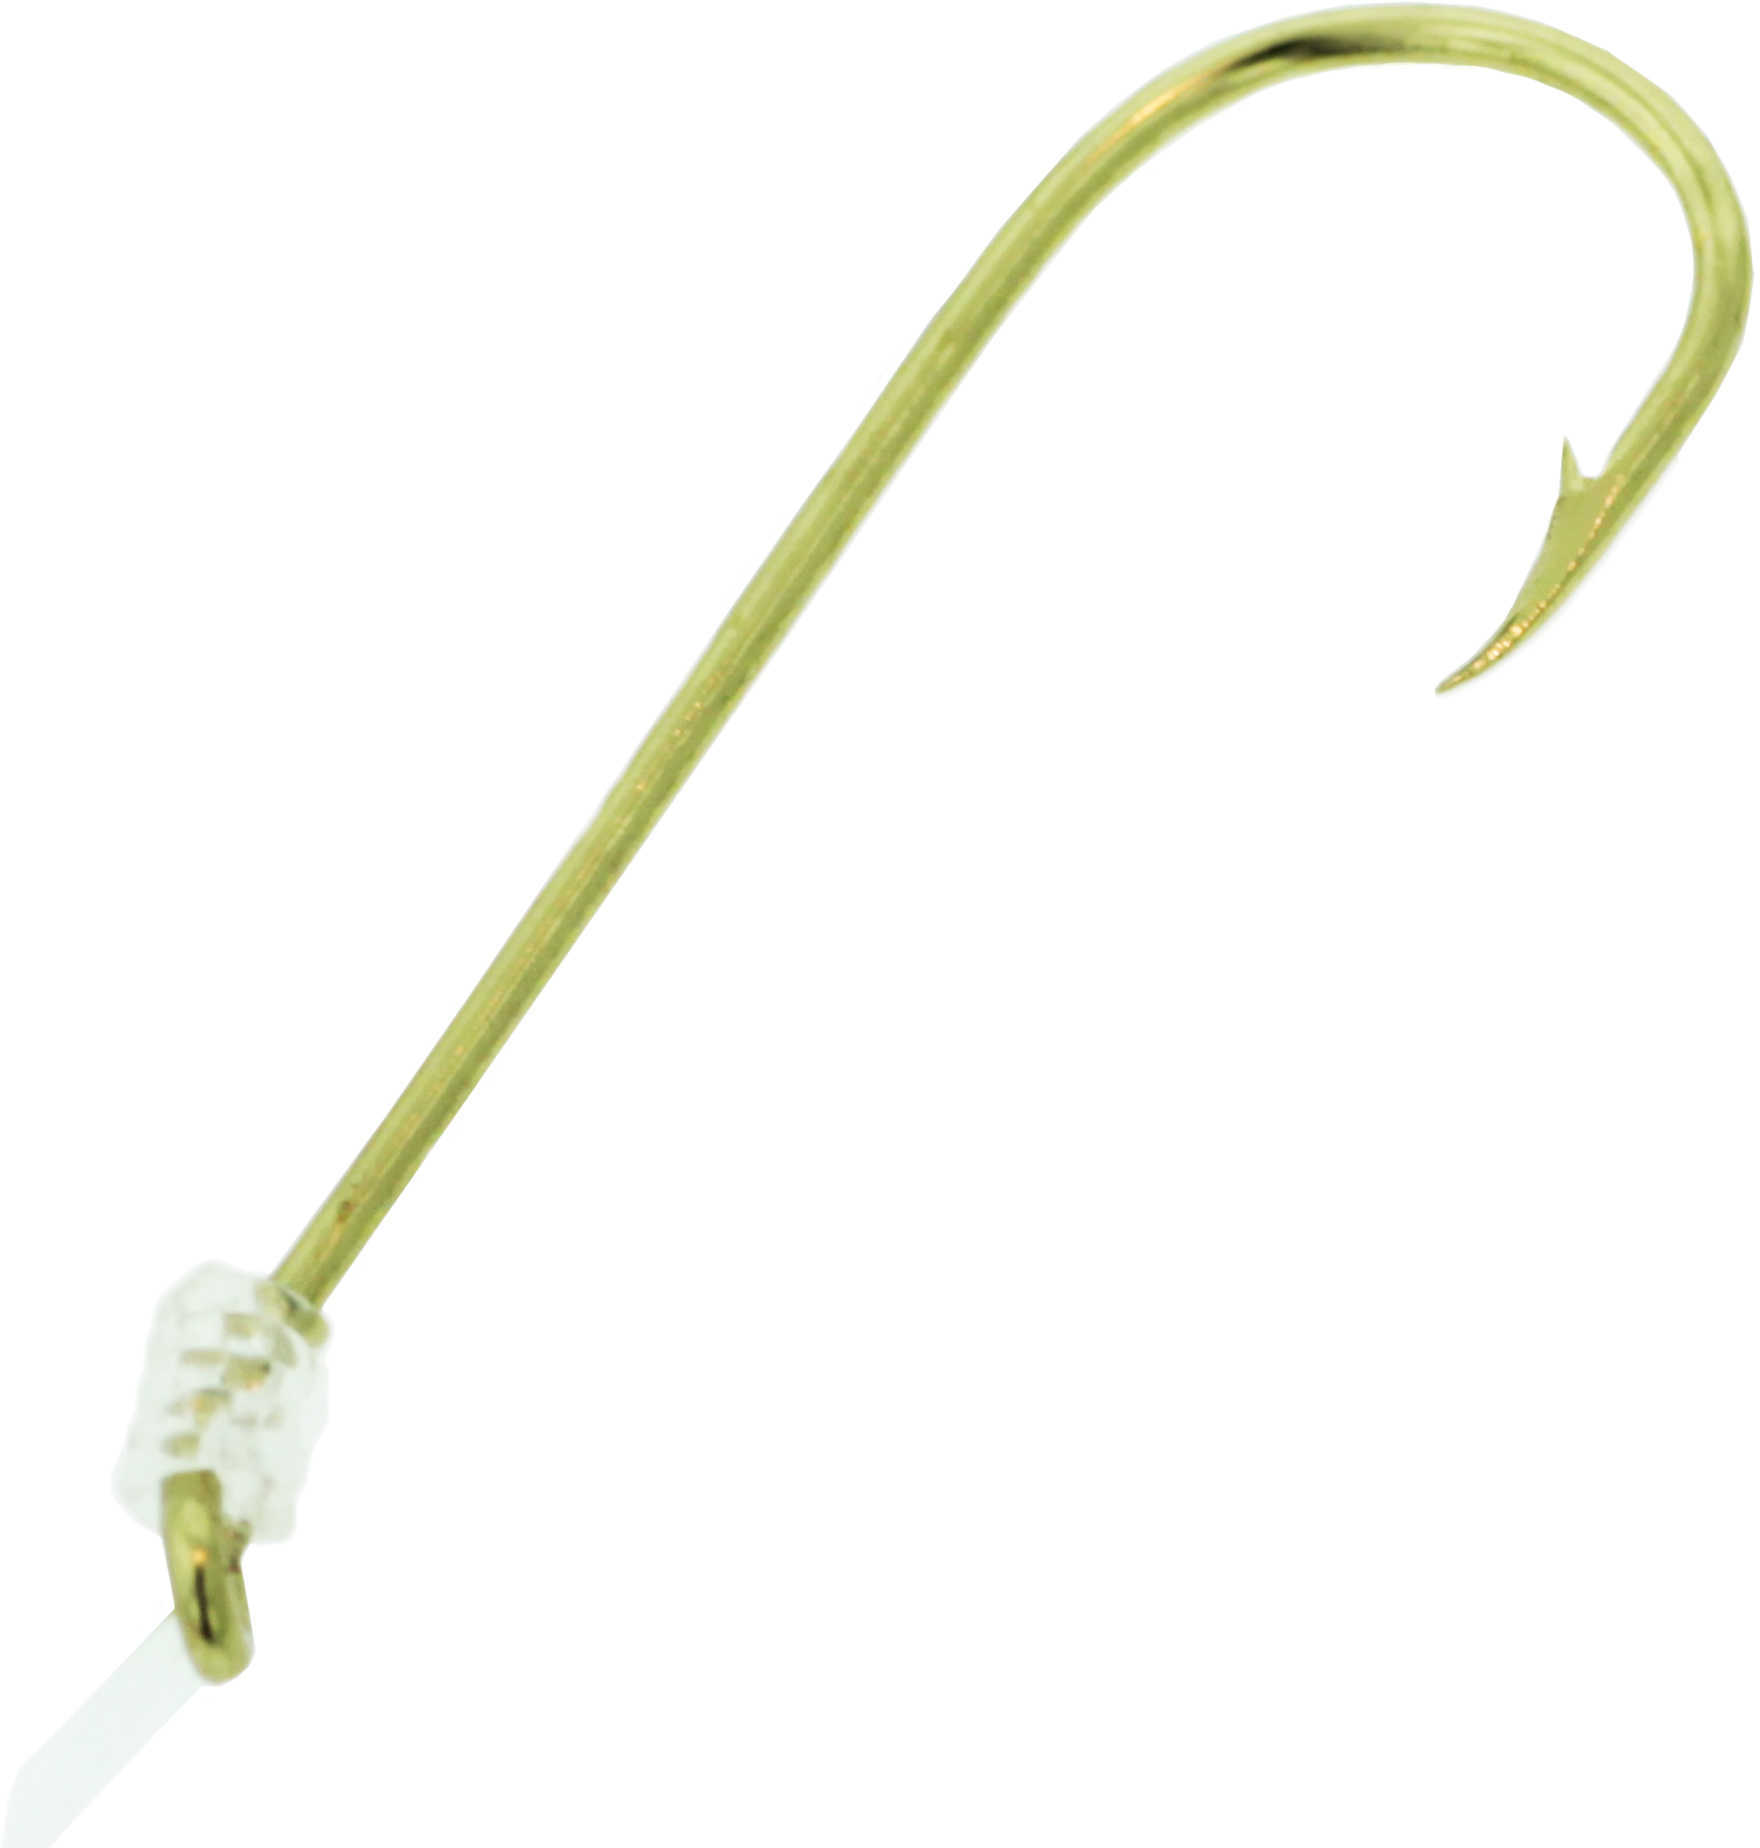 Eagle Claw Fishing Tackle Snelled Hook Gold Abeerdeen 24/ctn 121-3/0